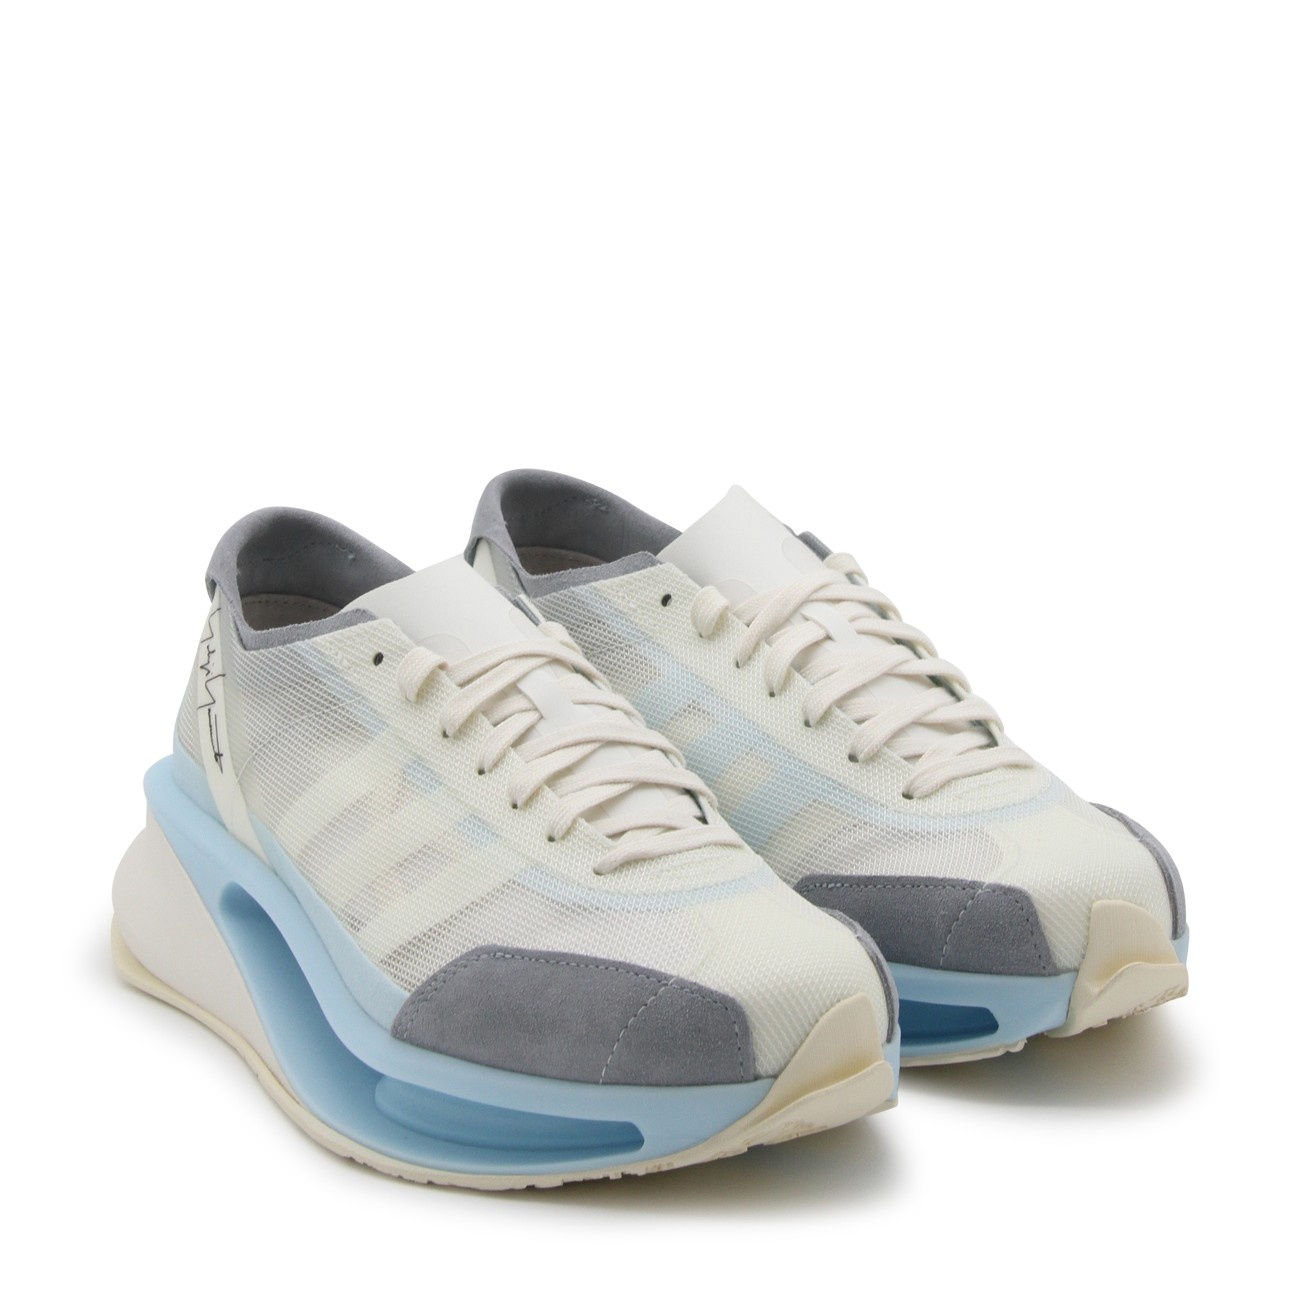 off white sneakers - 2